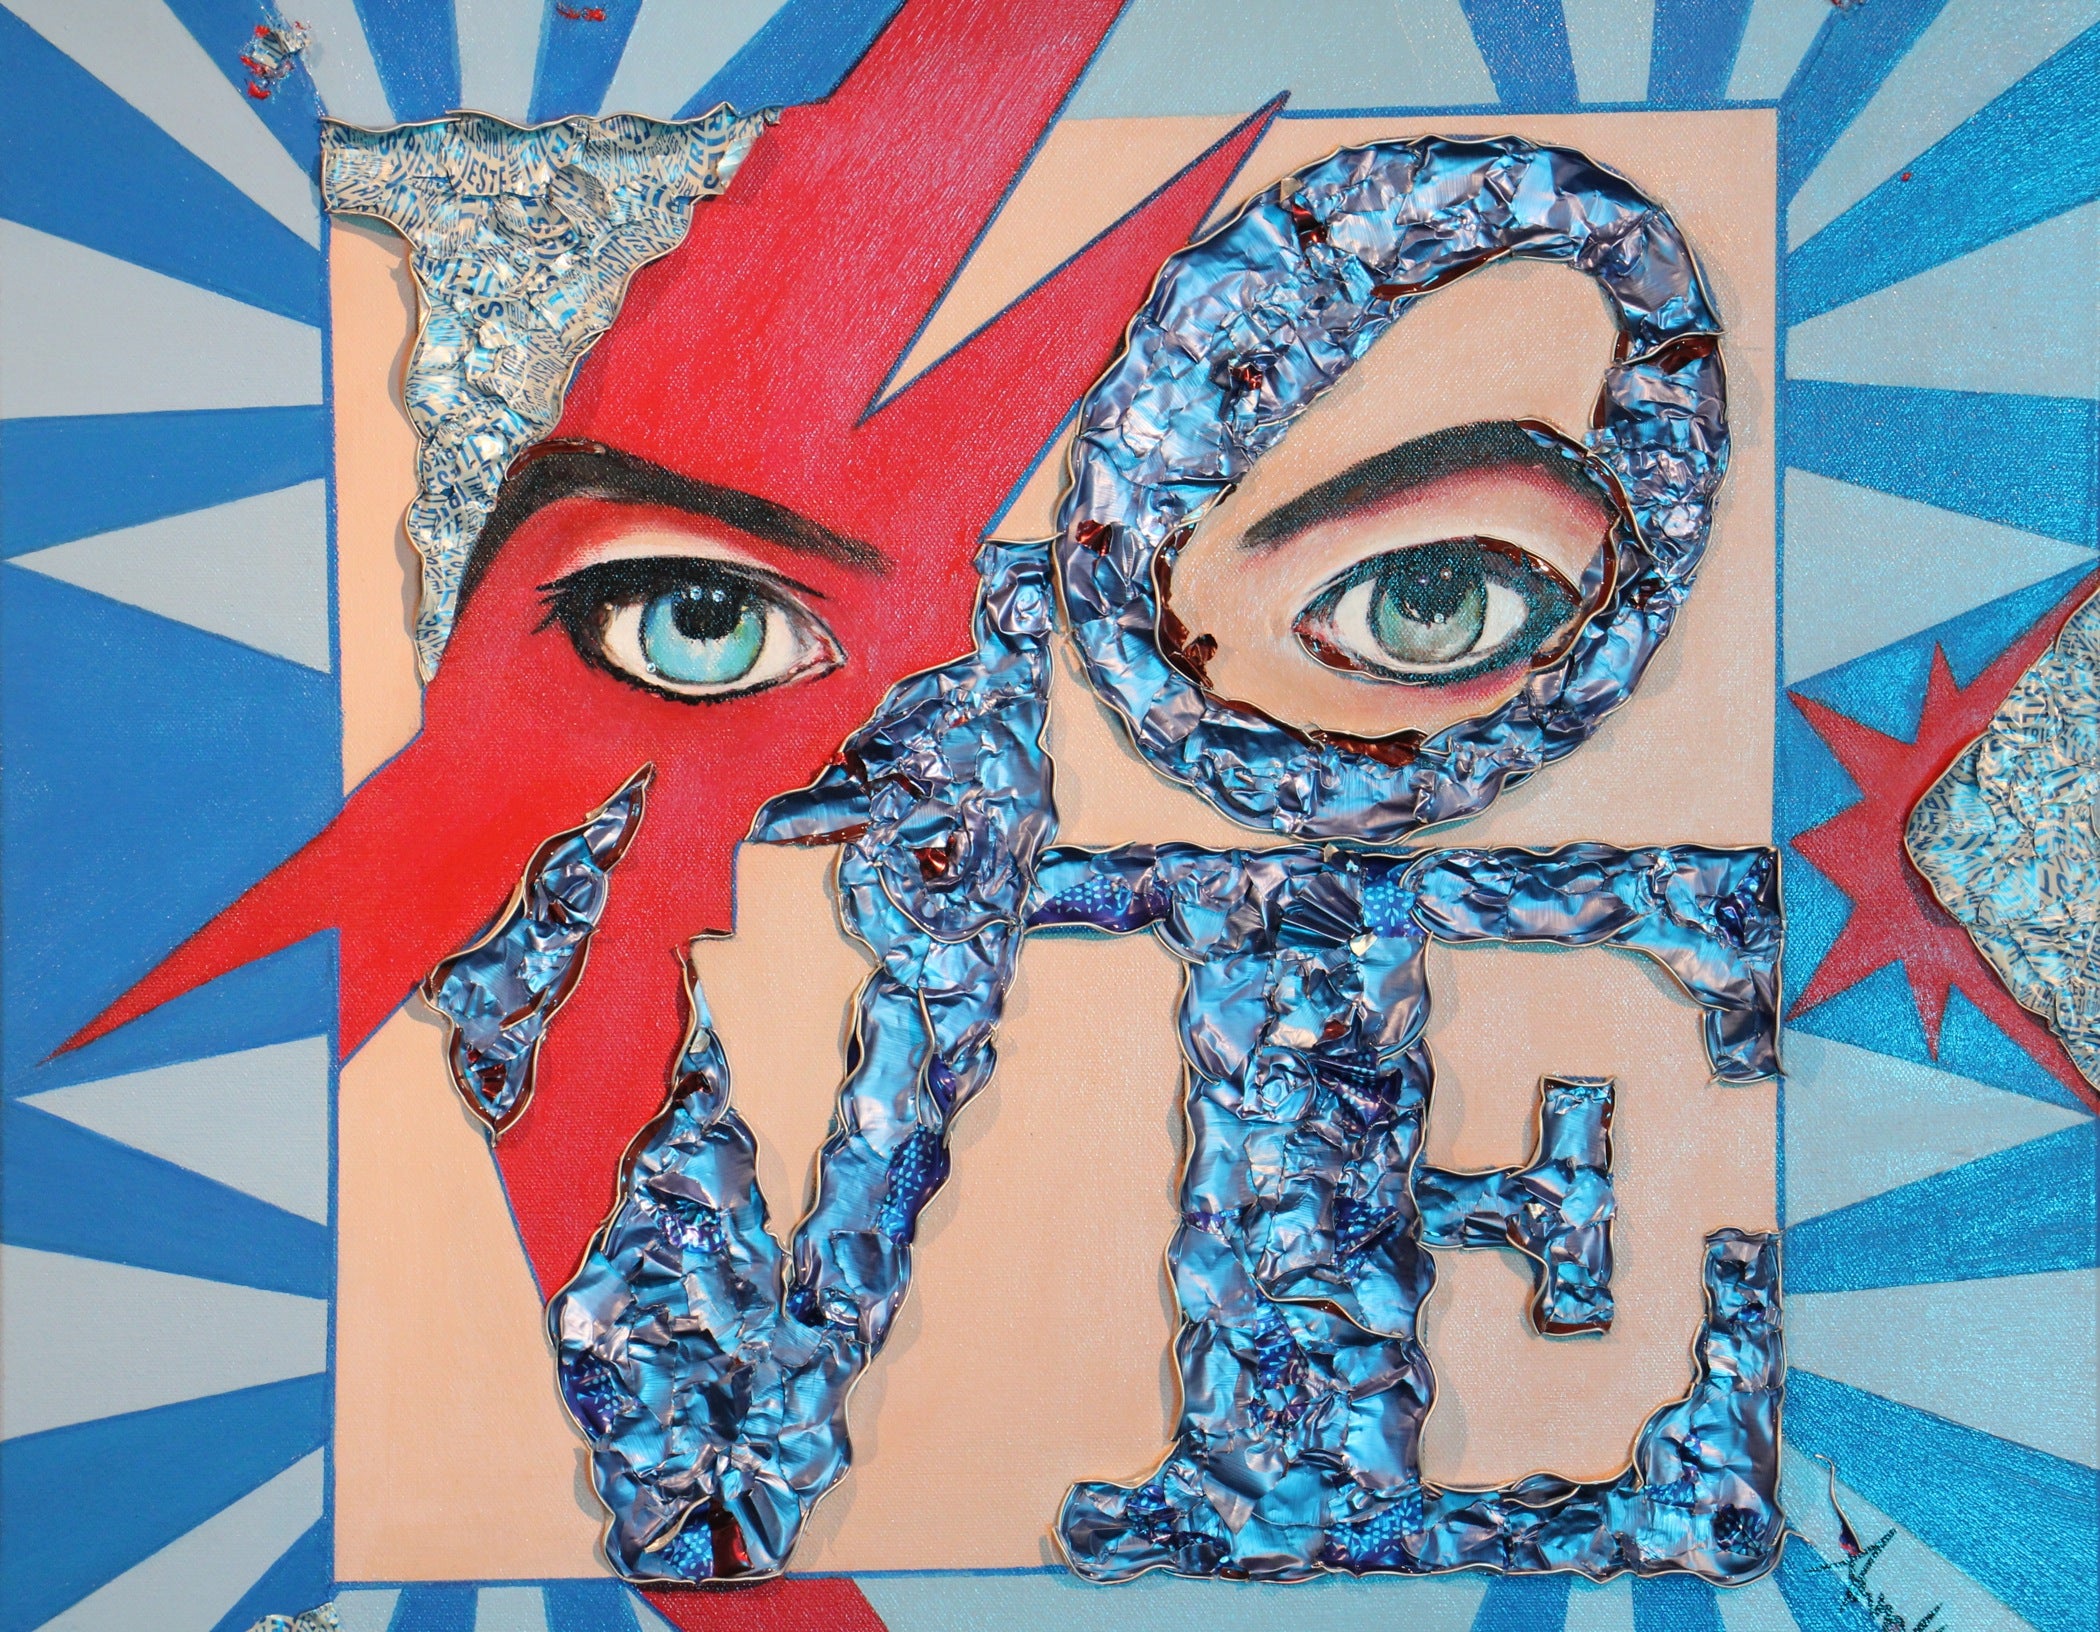 Philly Loves Bowie Week opens with fan art WHYY